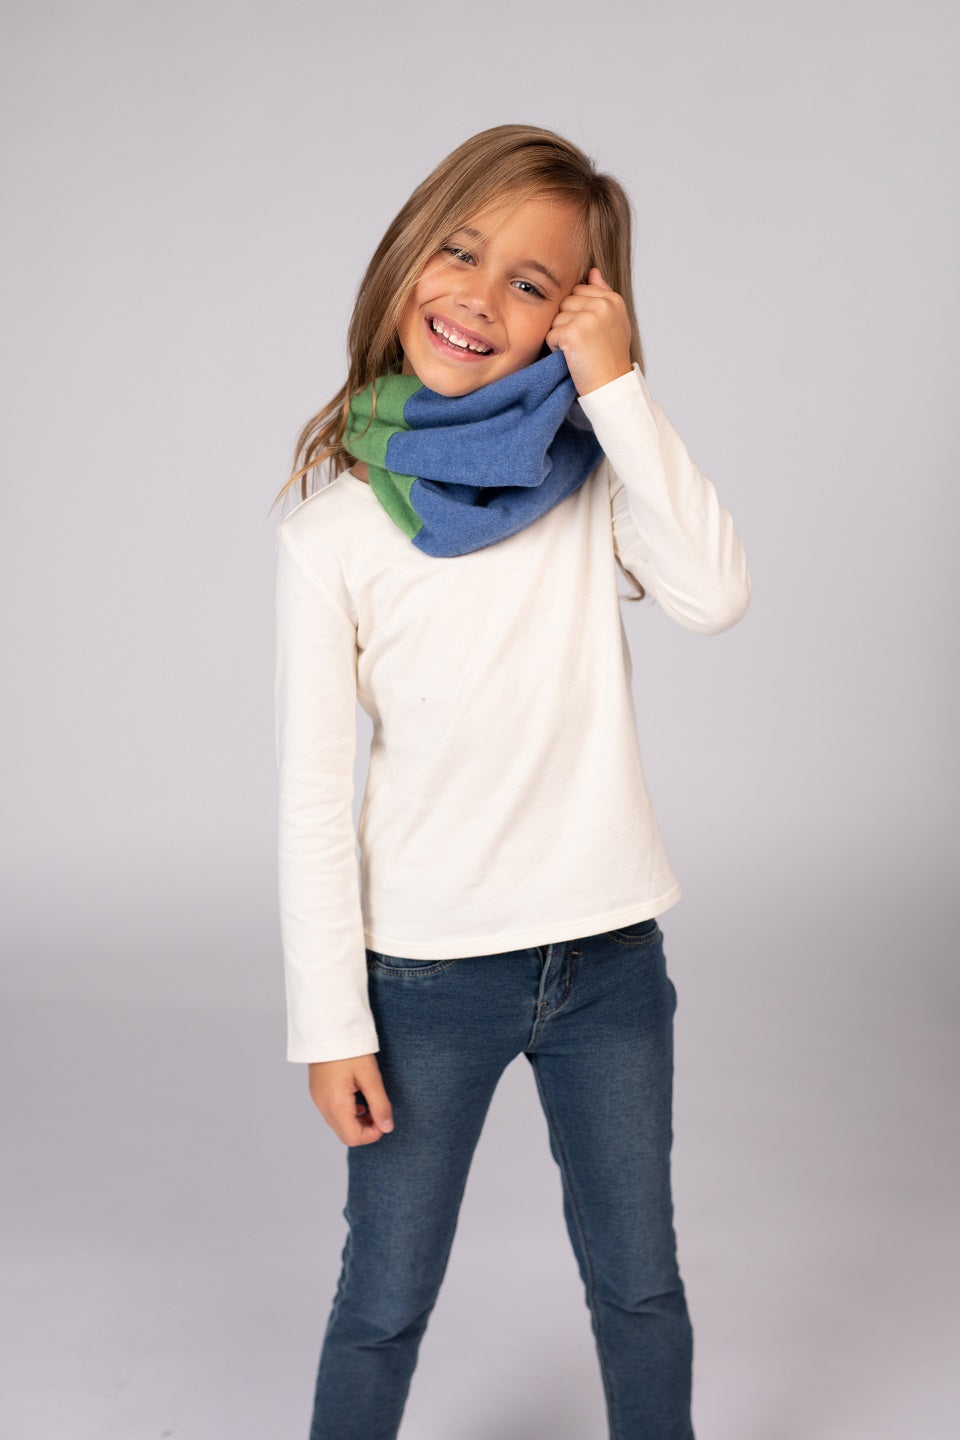 Green and Blue - Cashmere Infinity Scarf for Kids